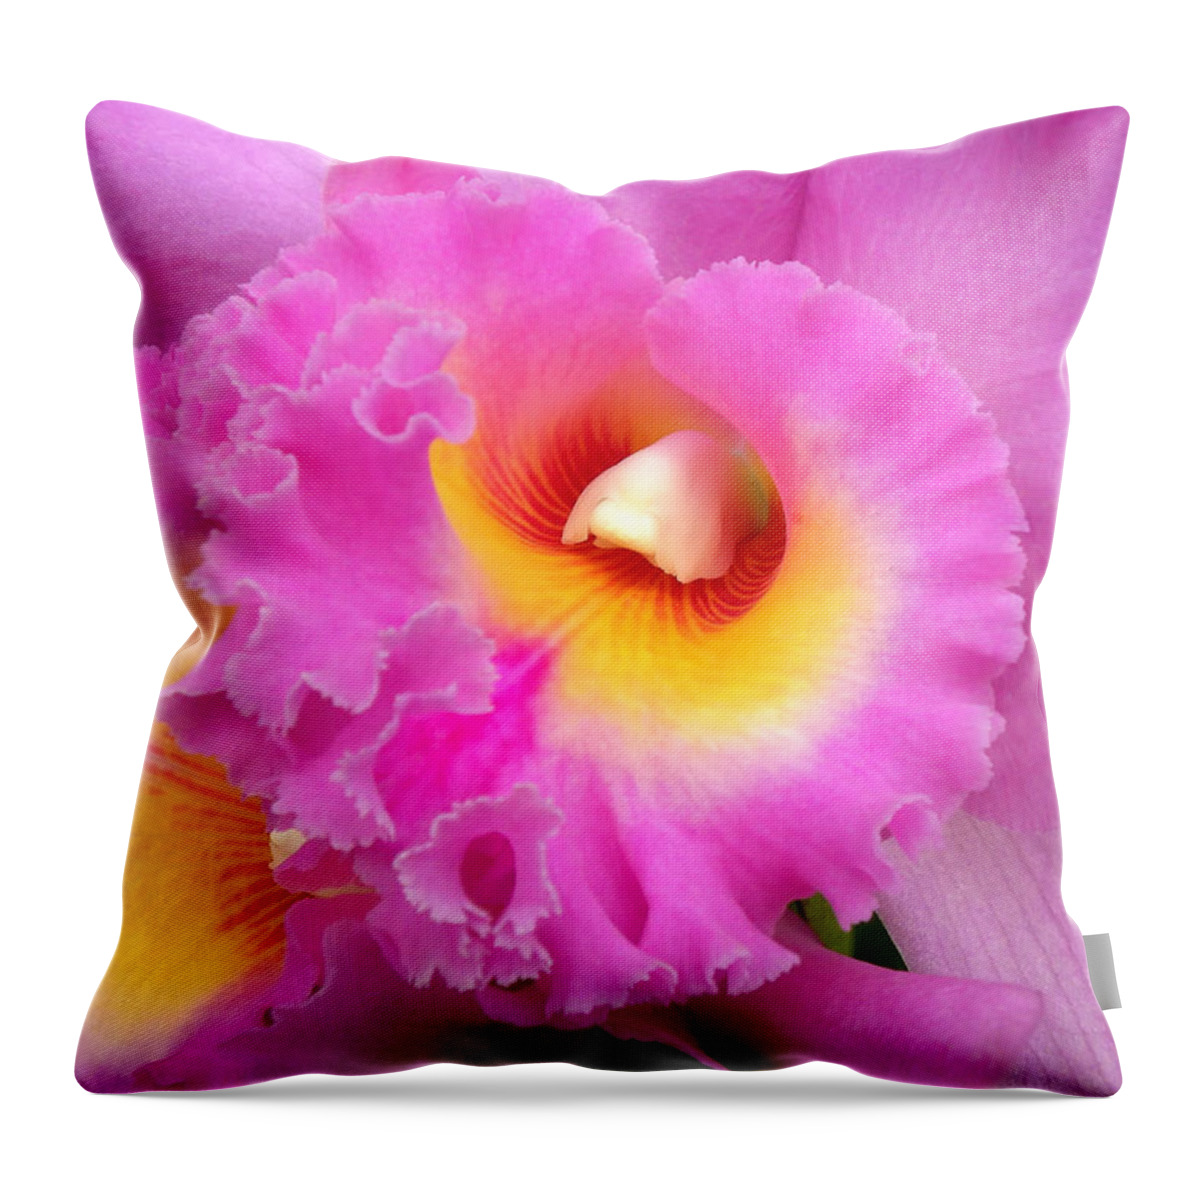 Orchid Throw Pillow featuring the photograph Cattleya Orchid 1 by Julie Palencia